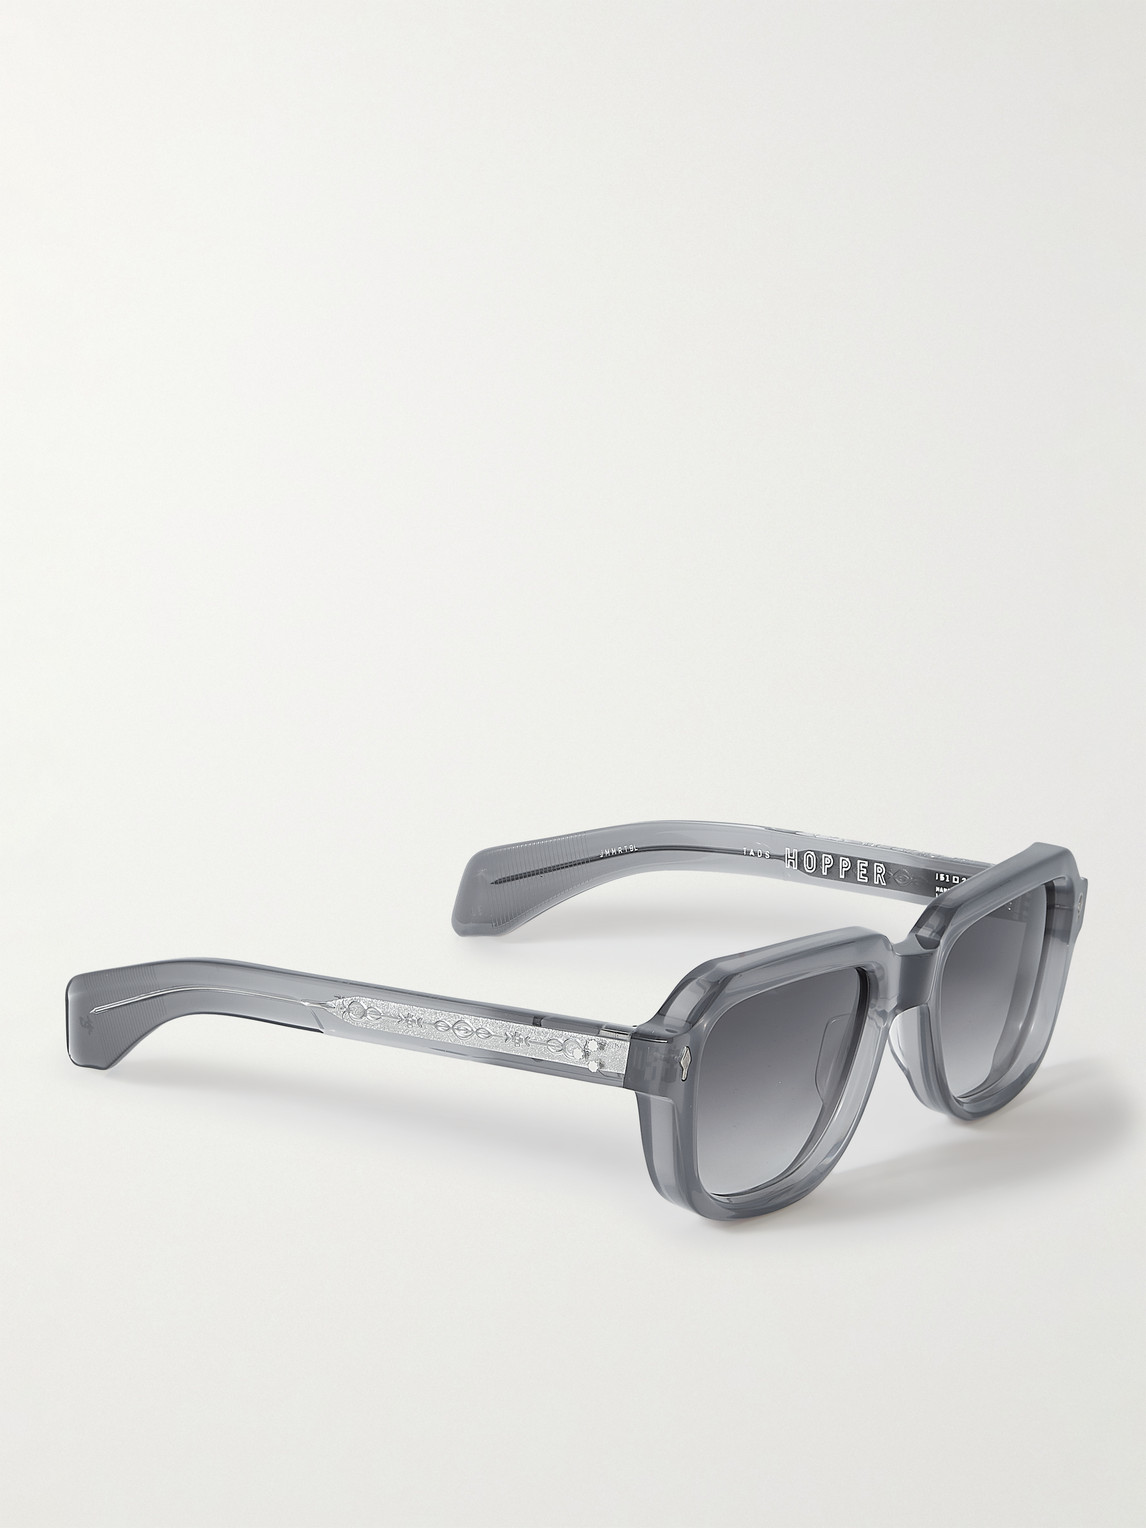 Shop Jacques Marie Mage Taos Square-frame Acetate Sunglasses In Gray